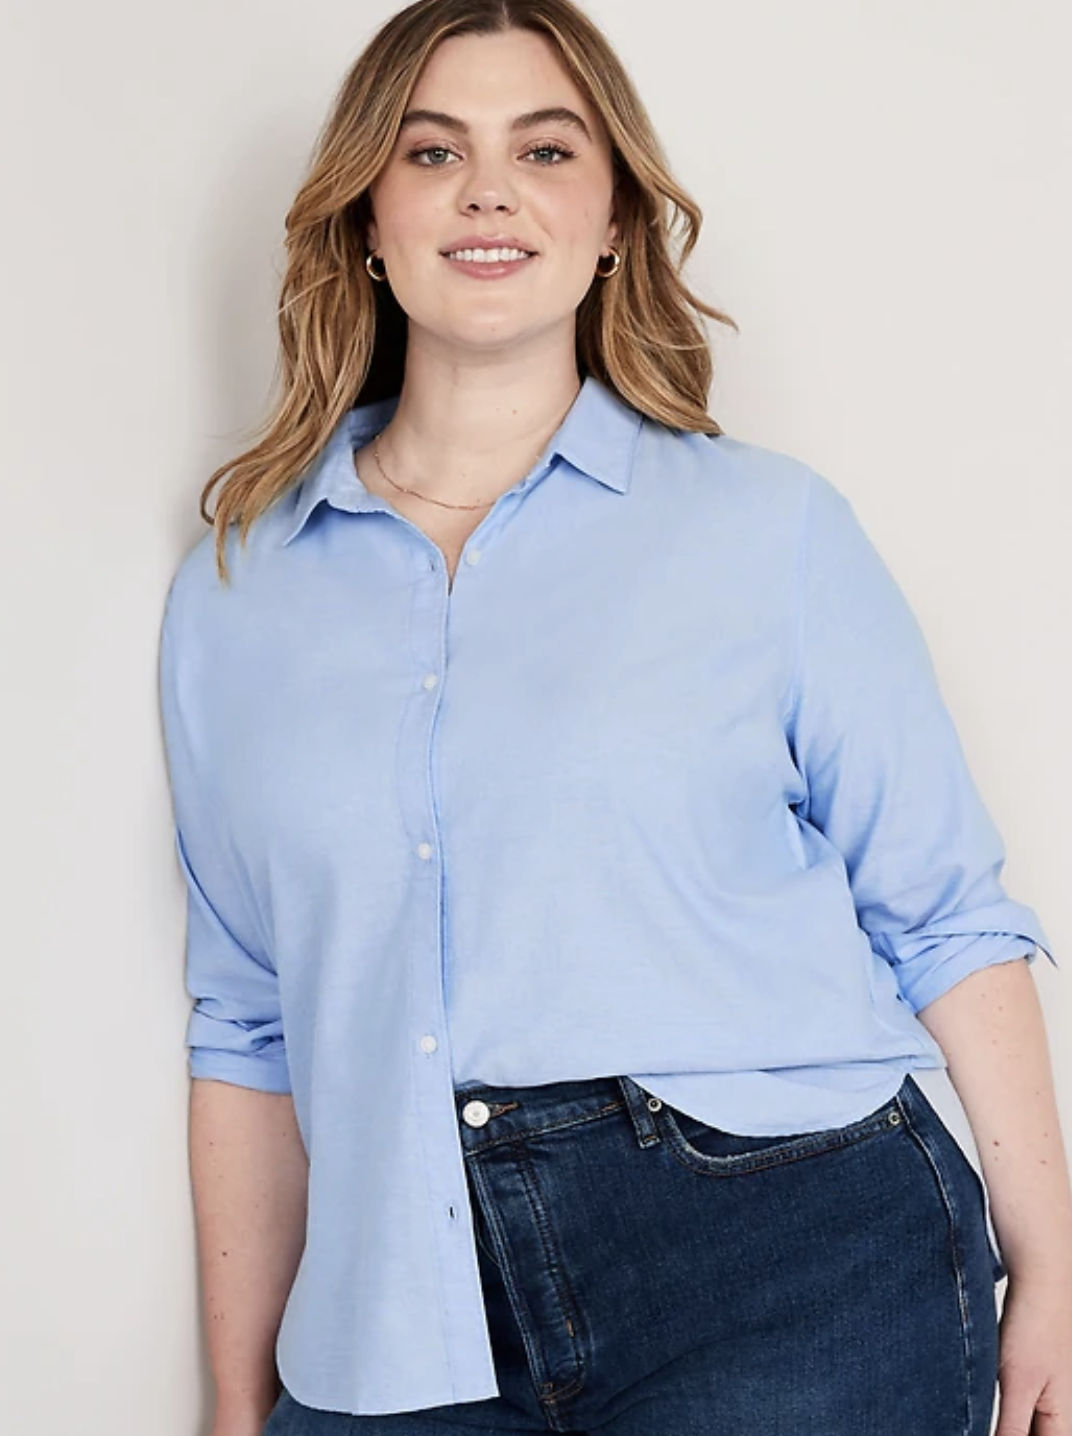 model wearing the shirt half French-tucked into their jeans